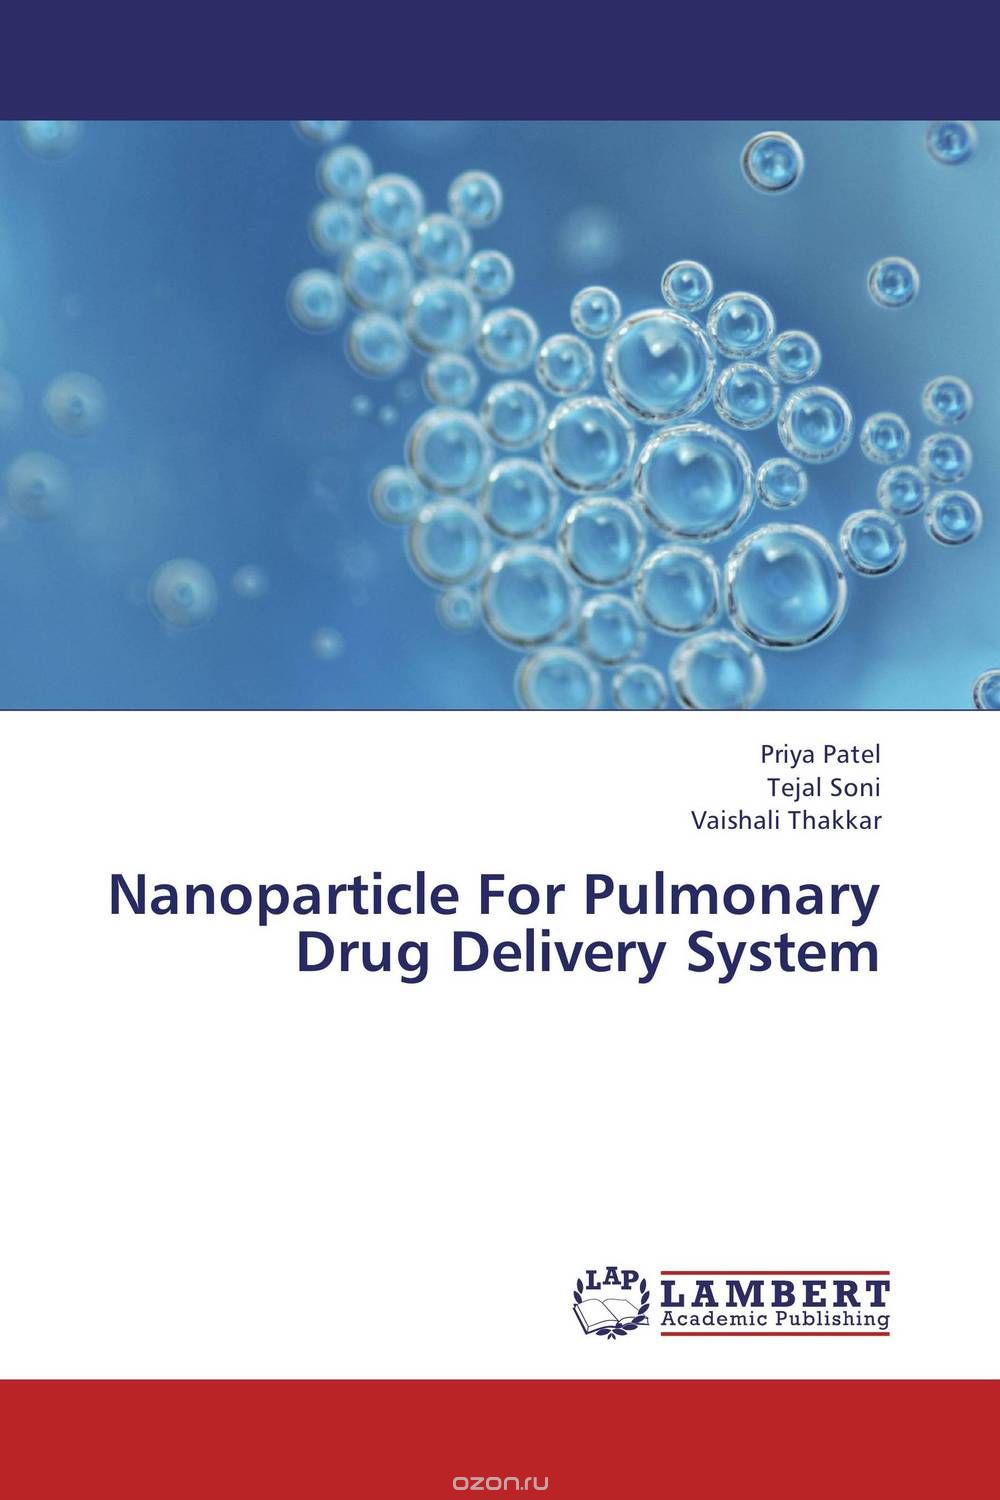 Nanoparticle For Pulmonary Drug Delivery System